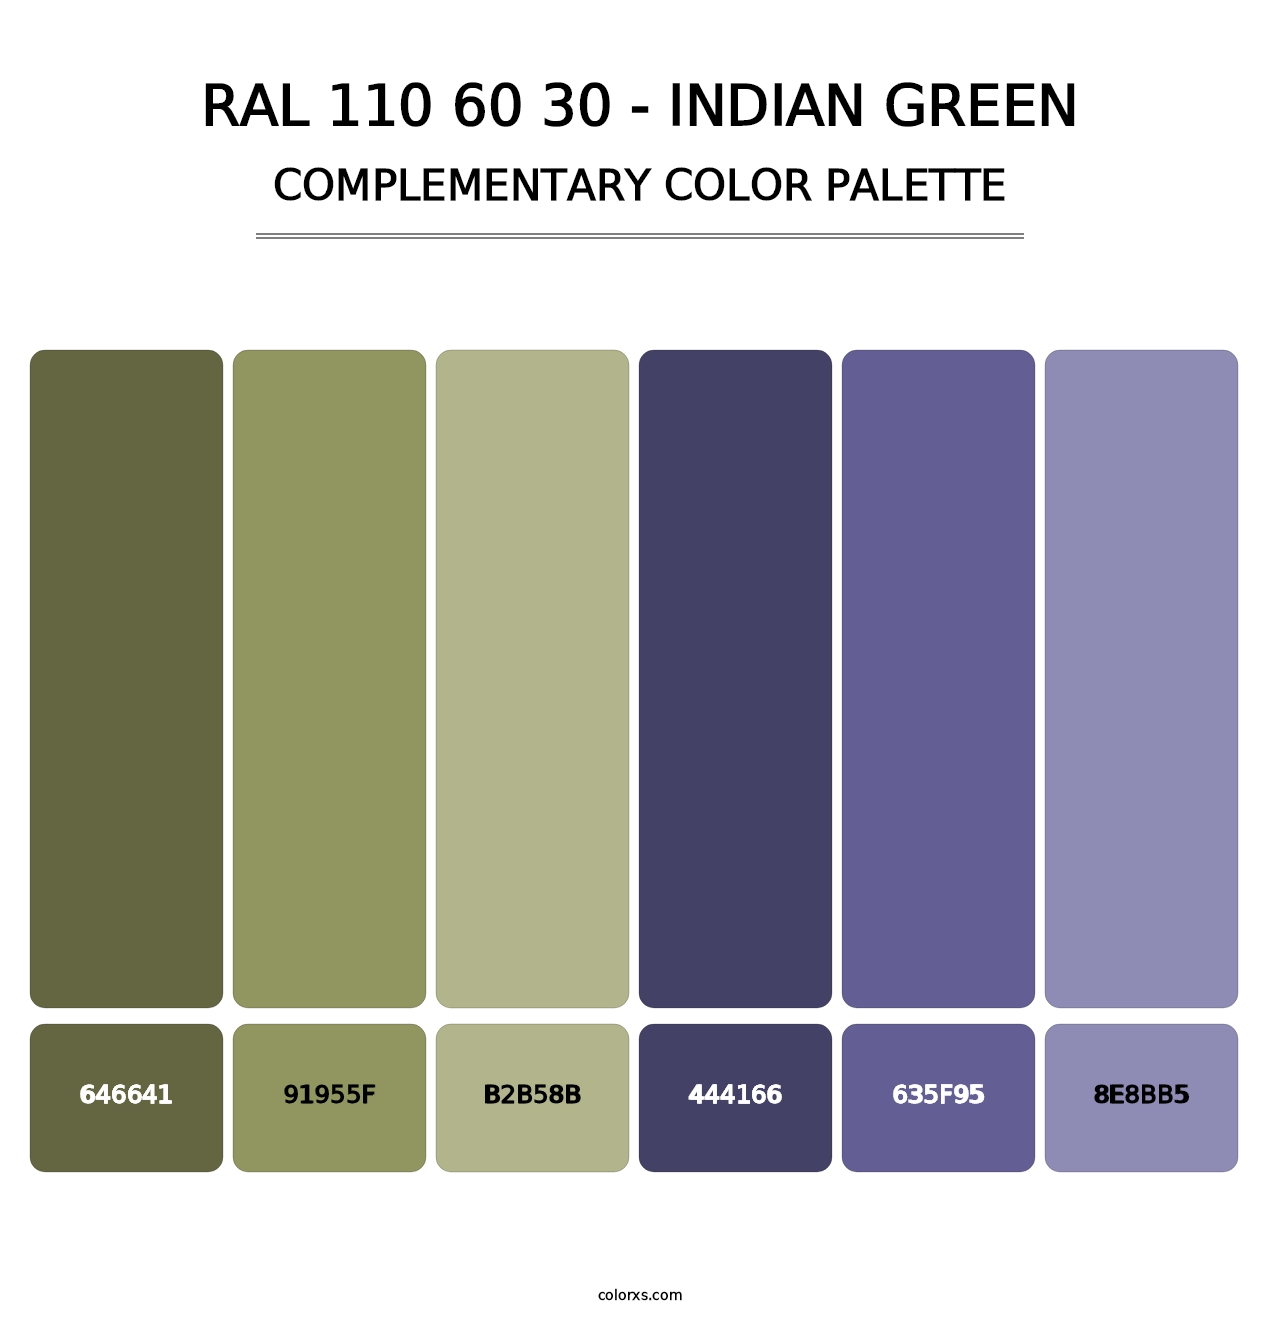 RAL 110 60 30 - Indian Green - Complementary Color Palette